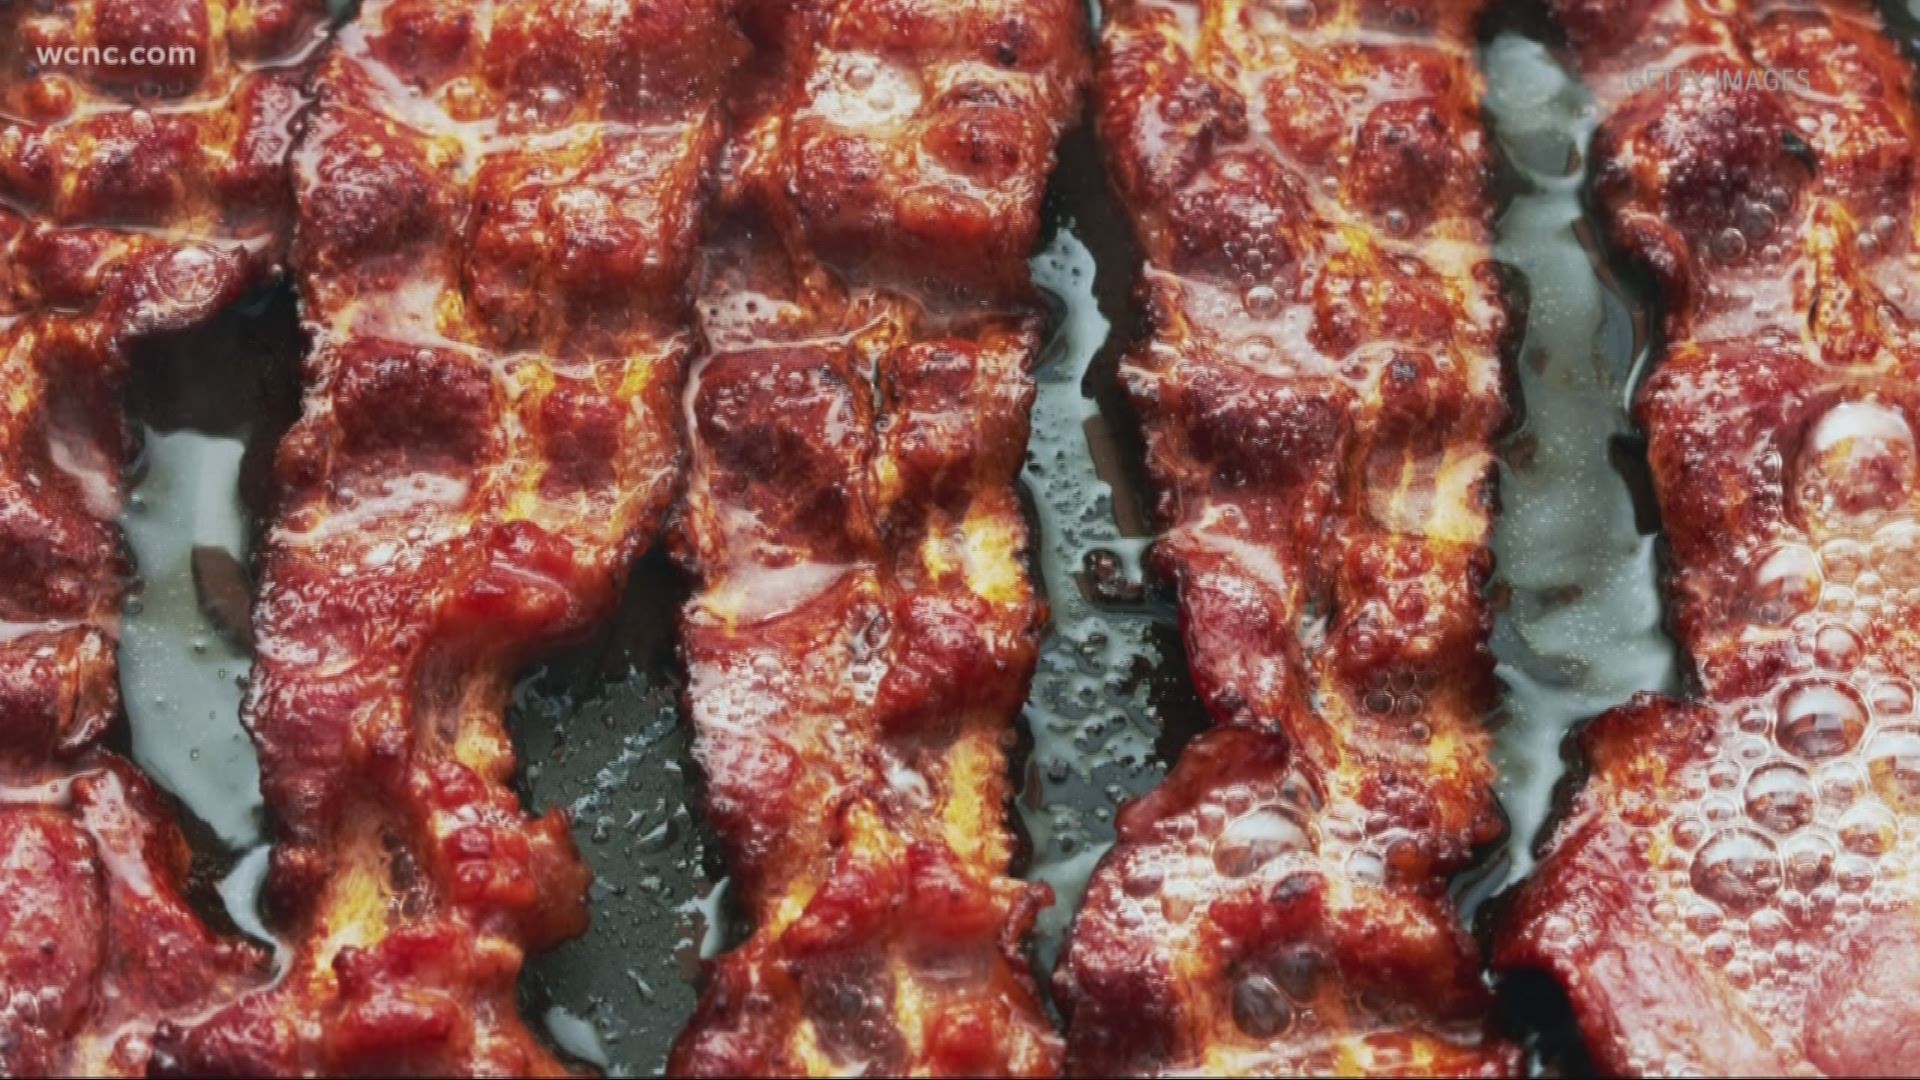 Bacon lovers, we've found the dream gig for you. A California restaurant is hiring a bacon intern. Your duties? Eat and rate menu items with bacon on them. There is a small catch, though.